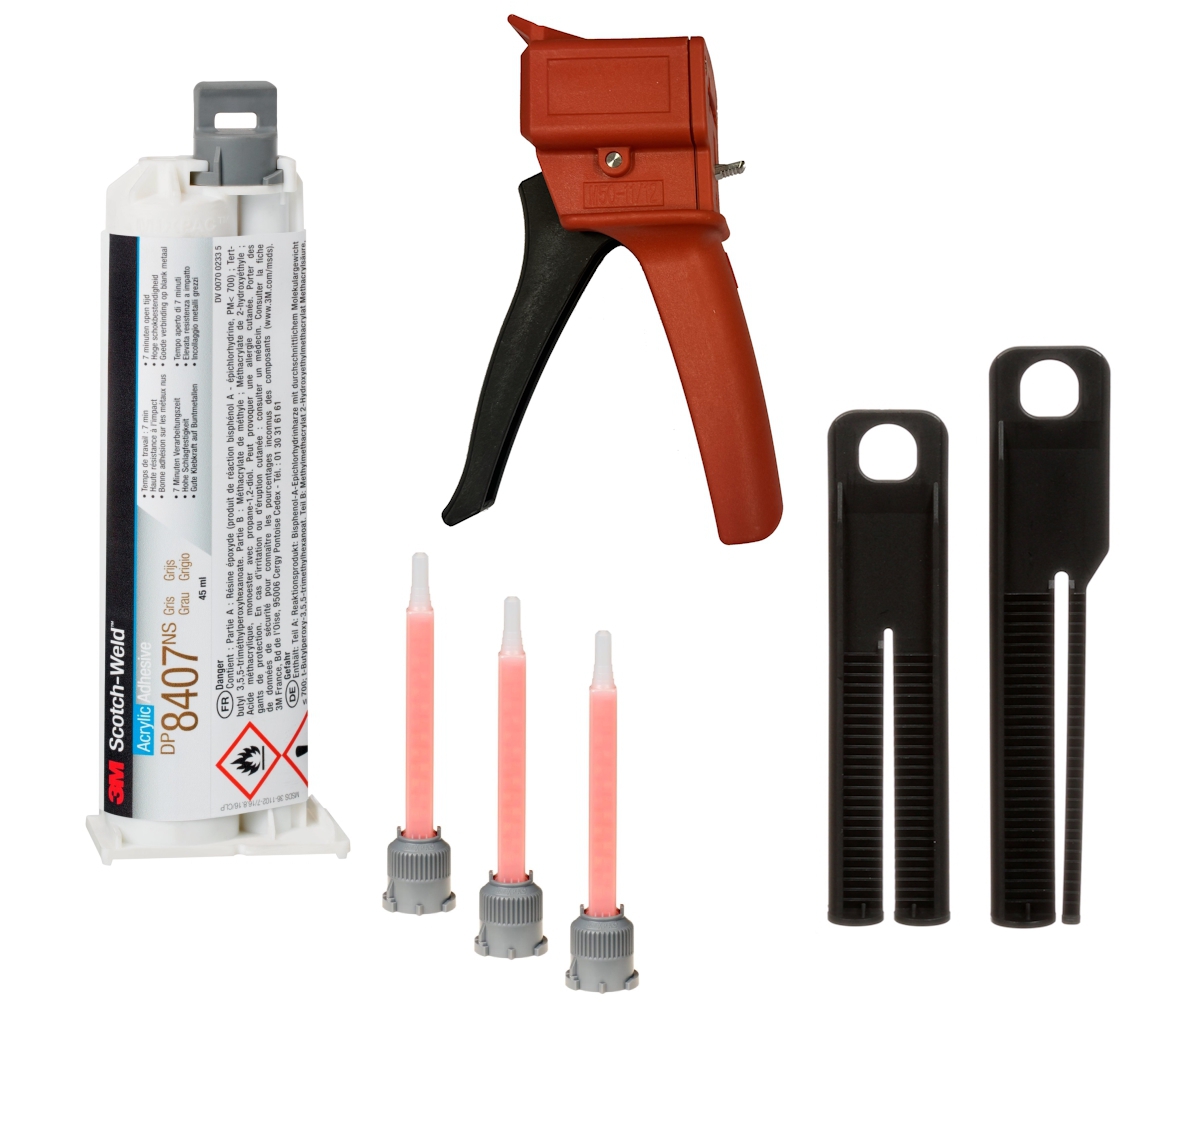 Starter set: 1x 3M Scotch-Weld 2-component construction adhesive EPX System DP8407 NS, grey, 45 ml 1x S-K-S hand tool for EPX 38 to 50 ml cartridges incl. feed piston 2:1 &amp; 10:1, 3x mixing nozzle